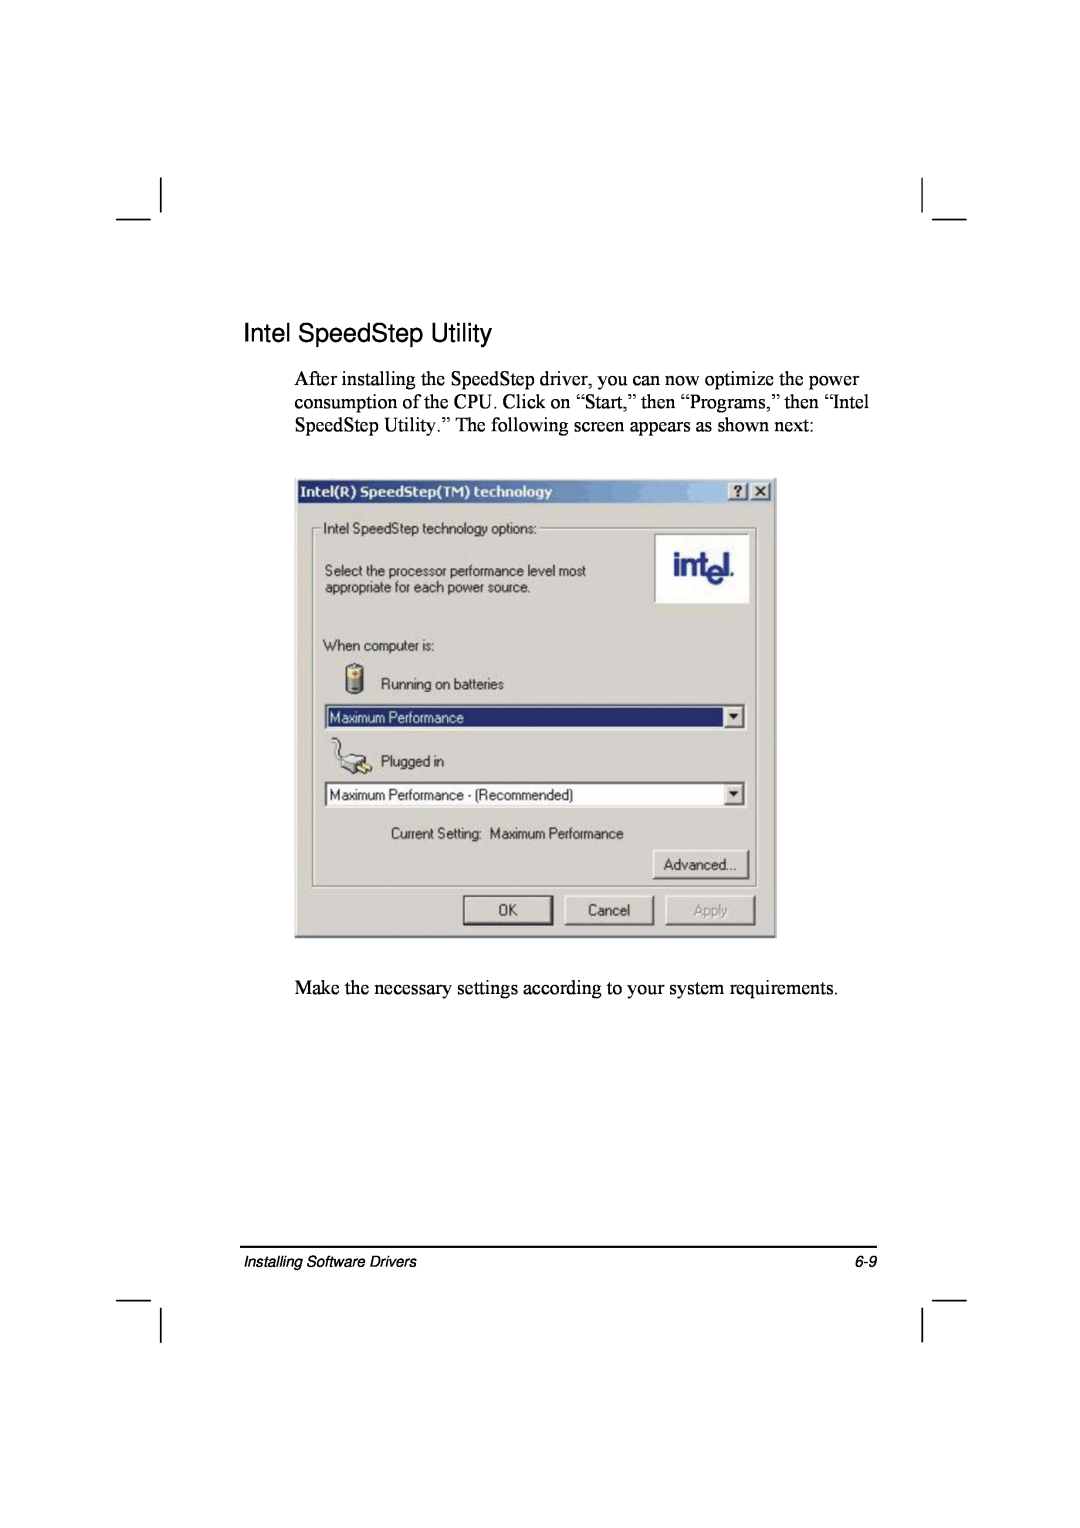 TAG 20 Series manual Intel SpeedStep Utility, Make the necessary settings according to your system requirements 